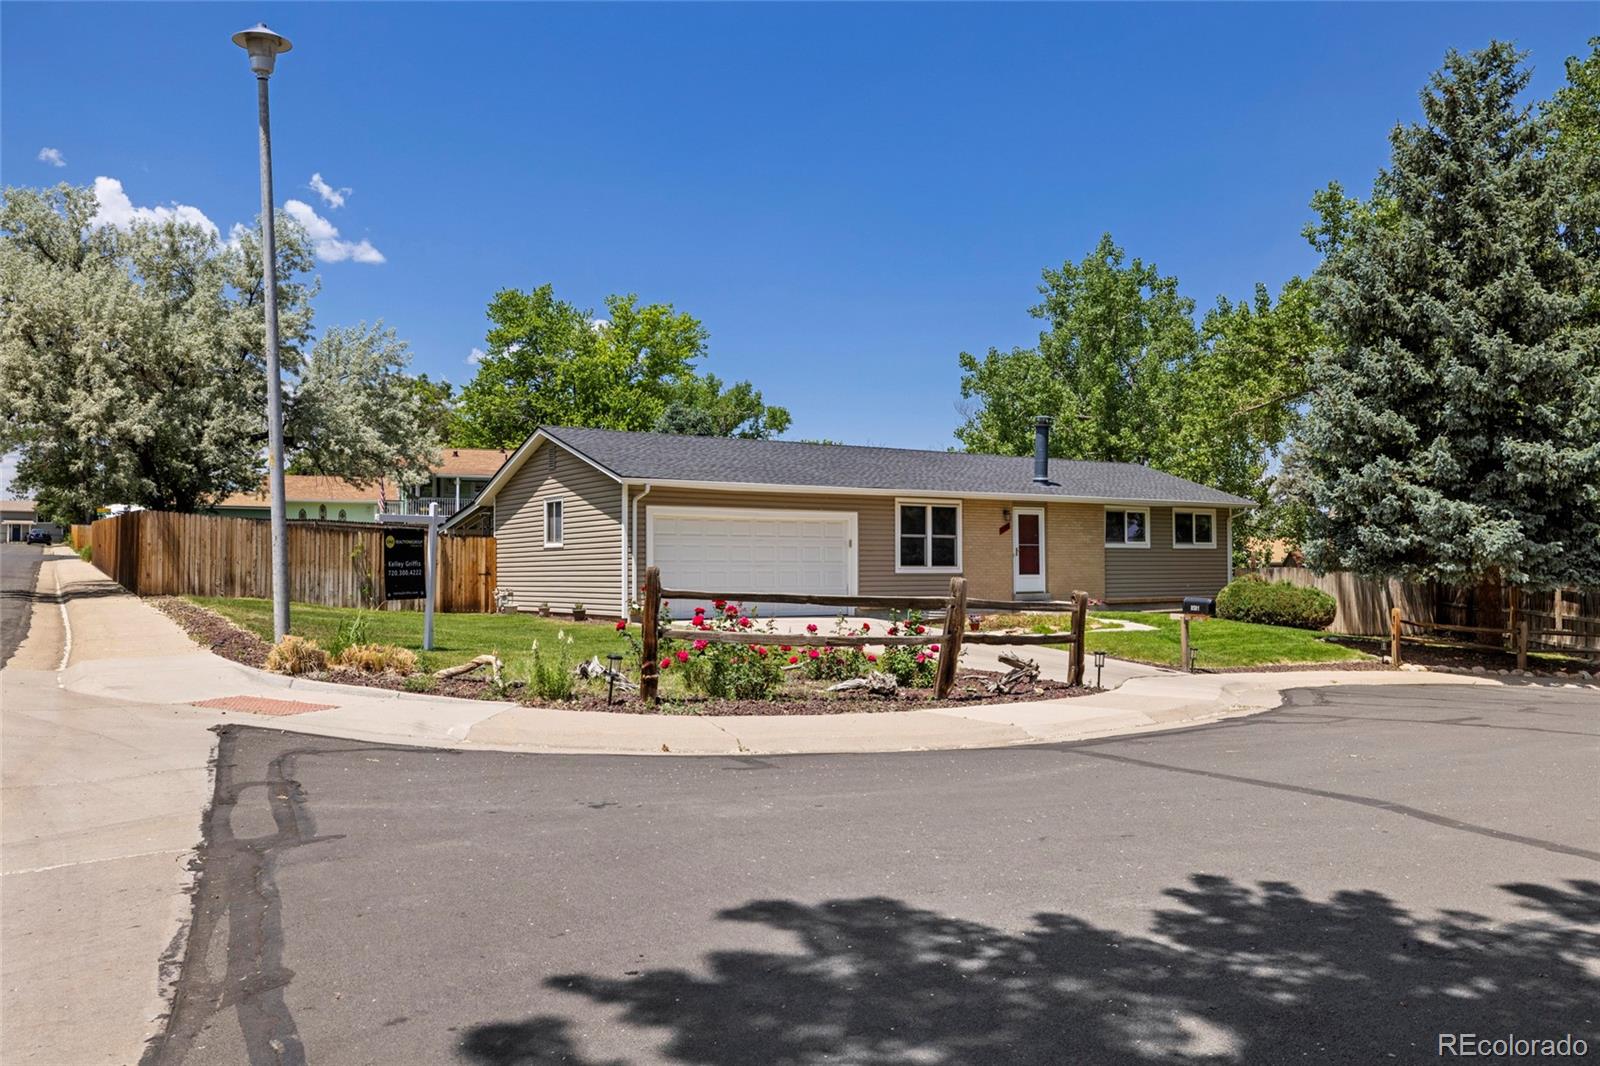 Report Image for 8581 W 89th Drive,Westminster, Colorado